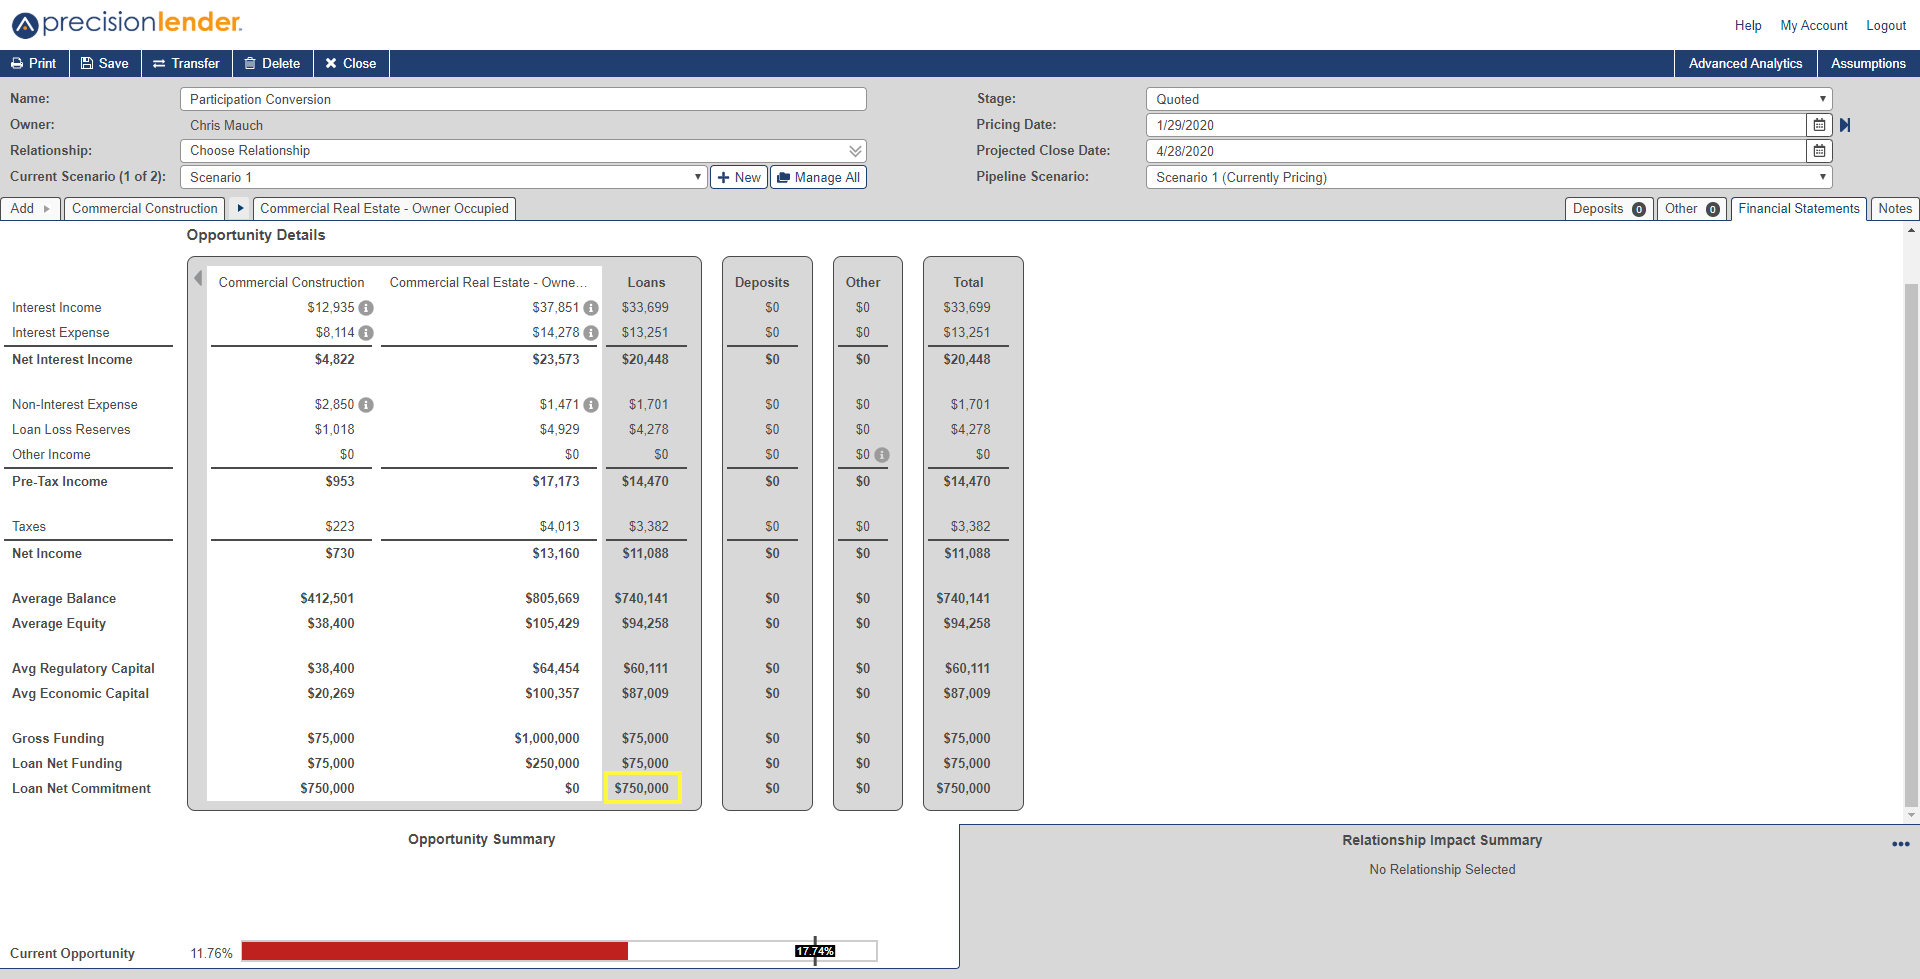 Financial Statement with Loan Net Commitment